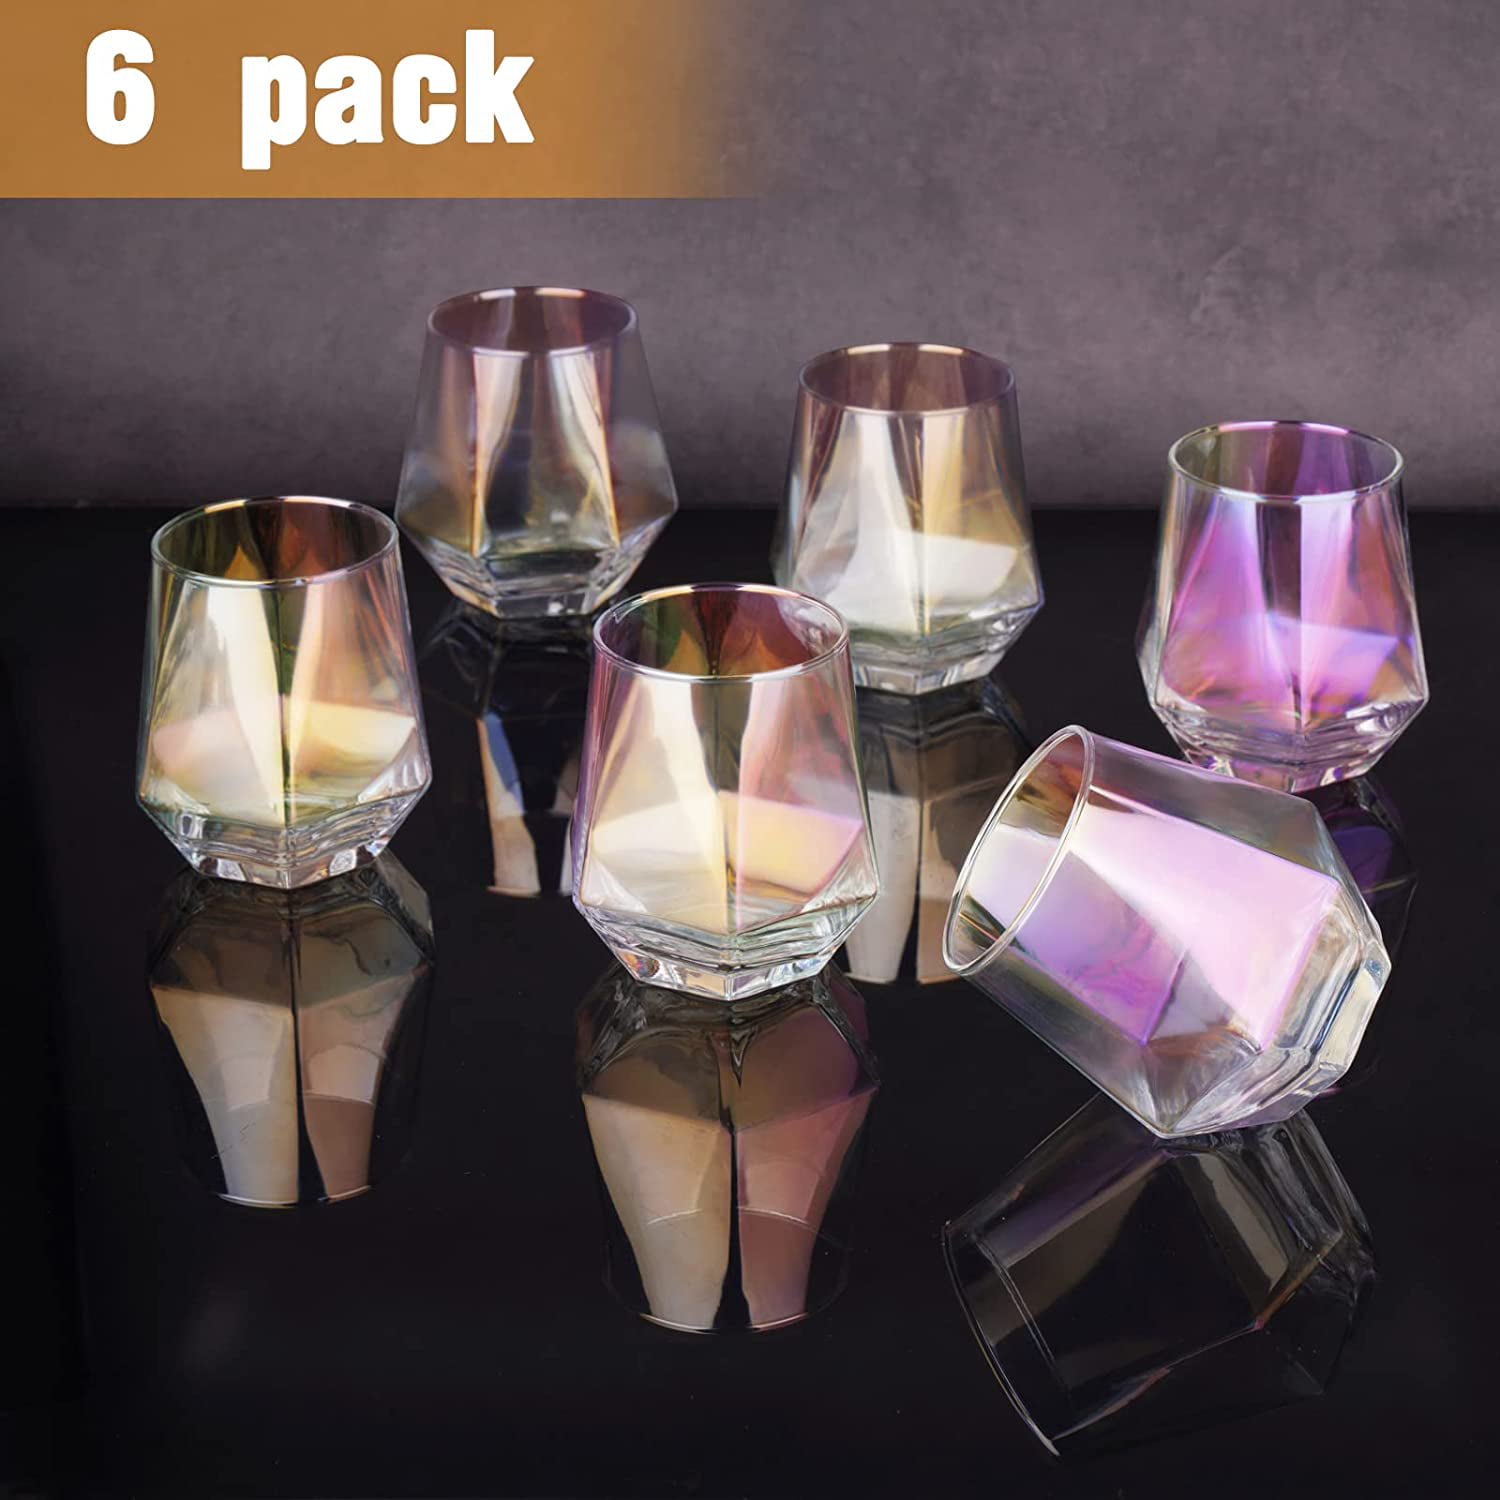 ColoVie Stemless Wine Glasses Set of 6, Colored Wine Glass, Old Fashioned,  Diamond Shaped, Unique Colorful Tumblers. 10oz. White Red Wine, Whiskey  Glasses, Cocktail, Gifts for Men, Birthday, Party - colovie